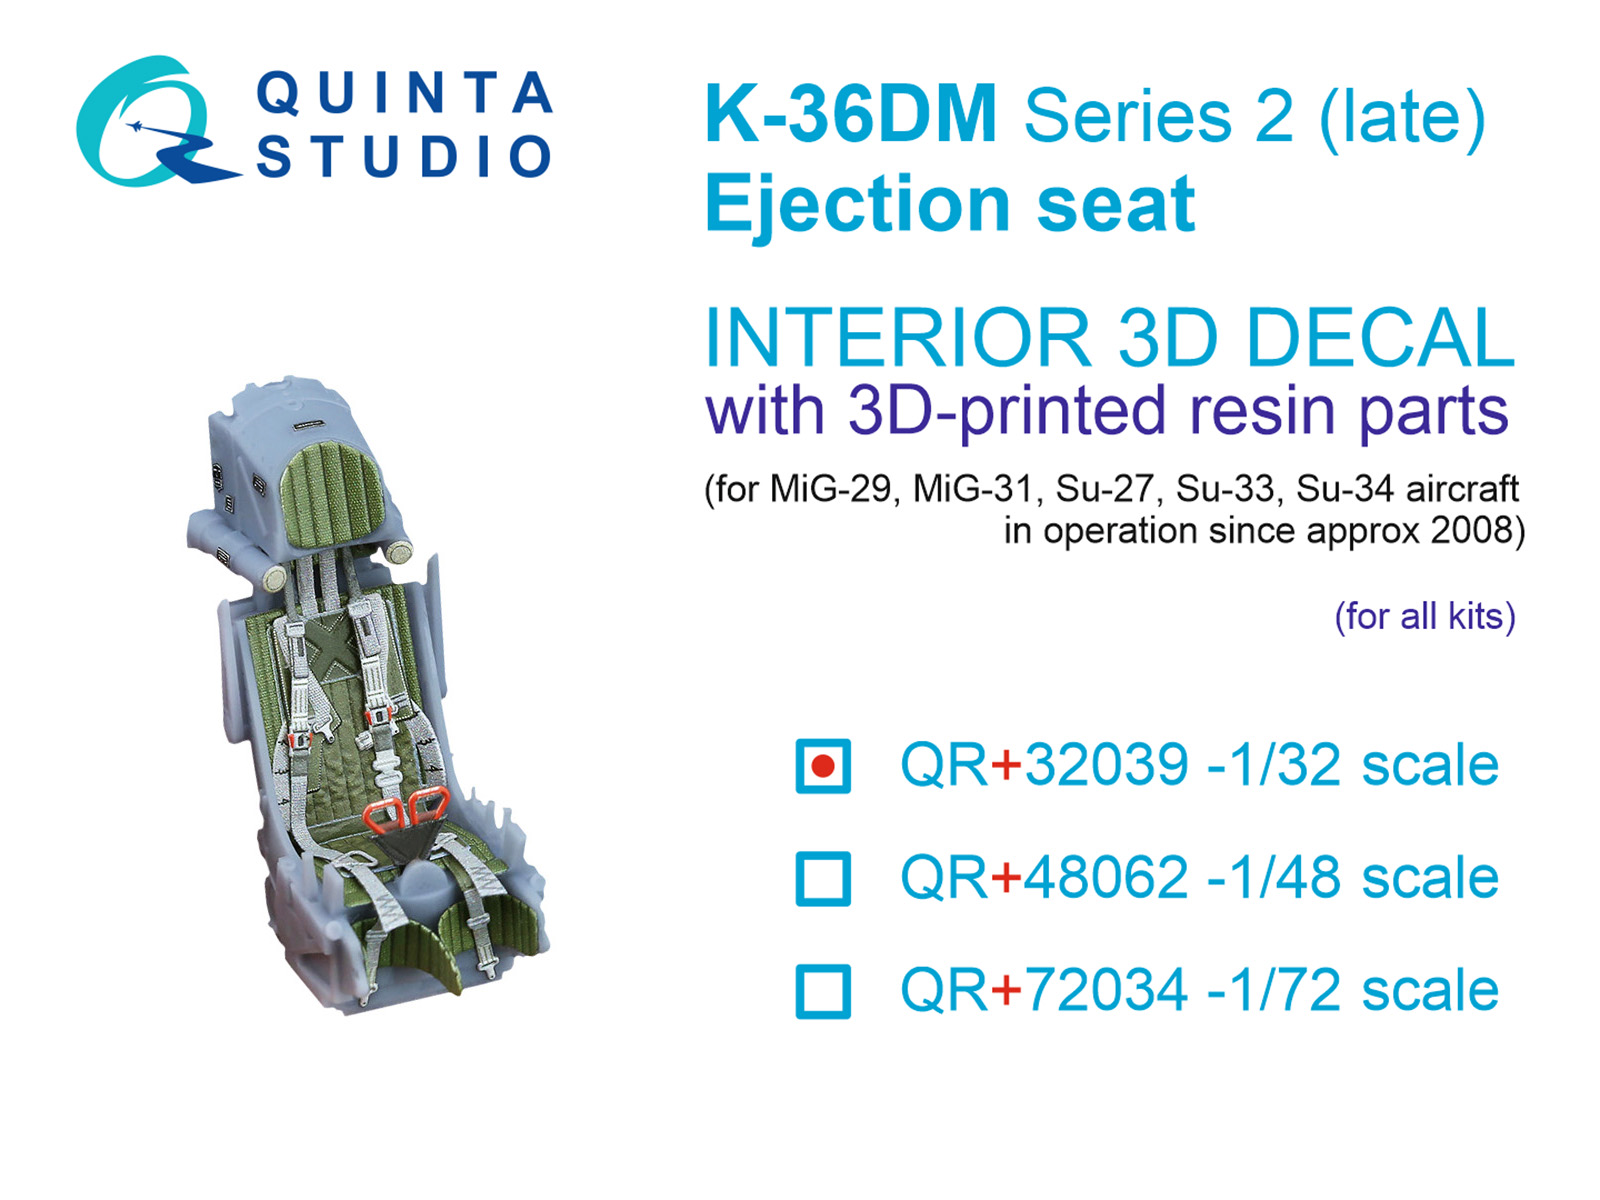 K-36DM Series2 (late) ejection seat (for MiG-29, MiG-31, Su-27, Su-33, Su-34 aircraft since 2008) (All kits)